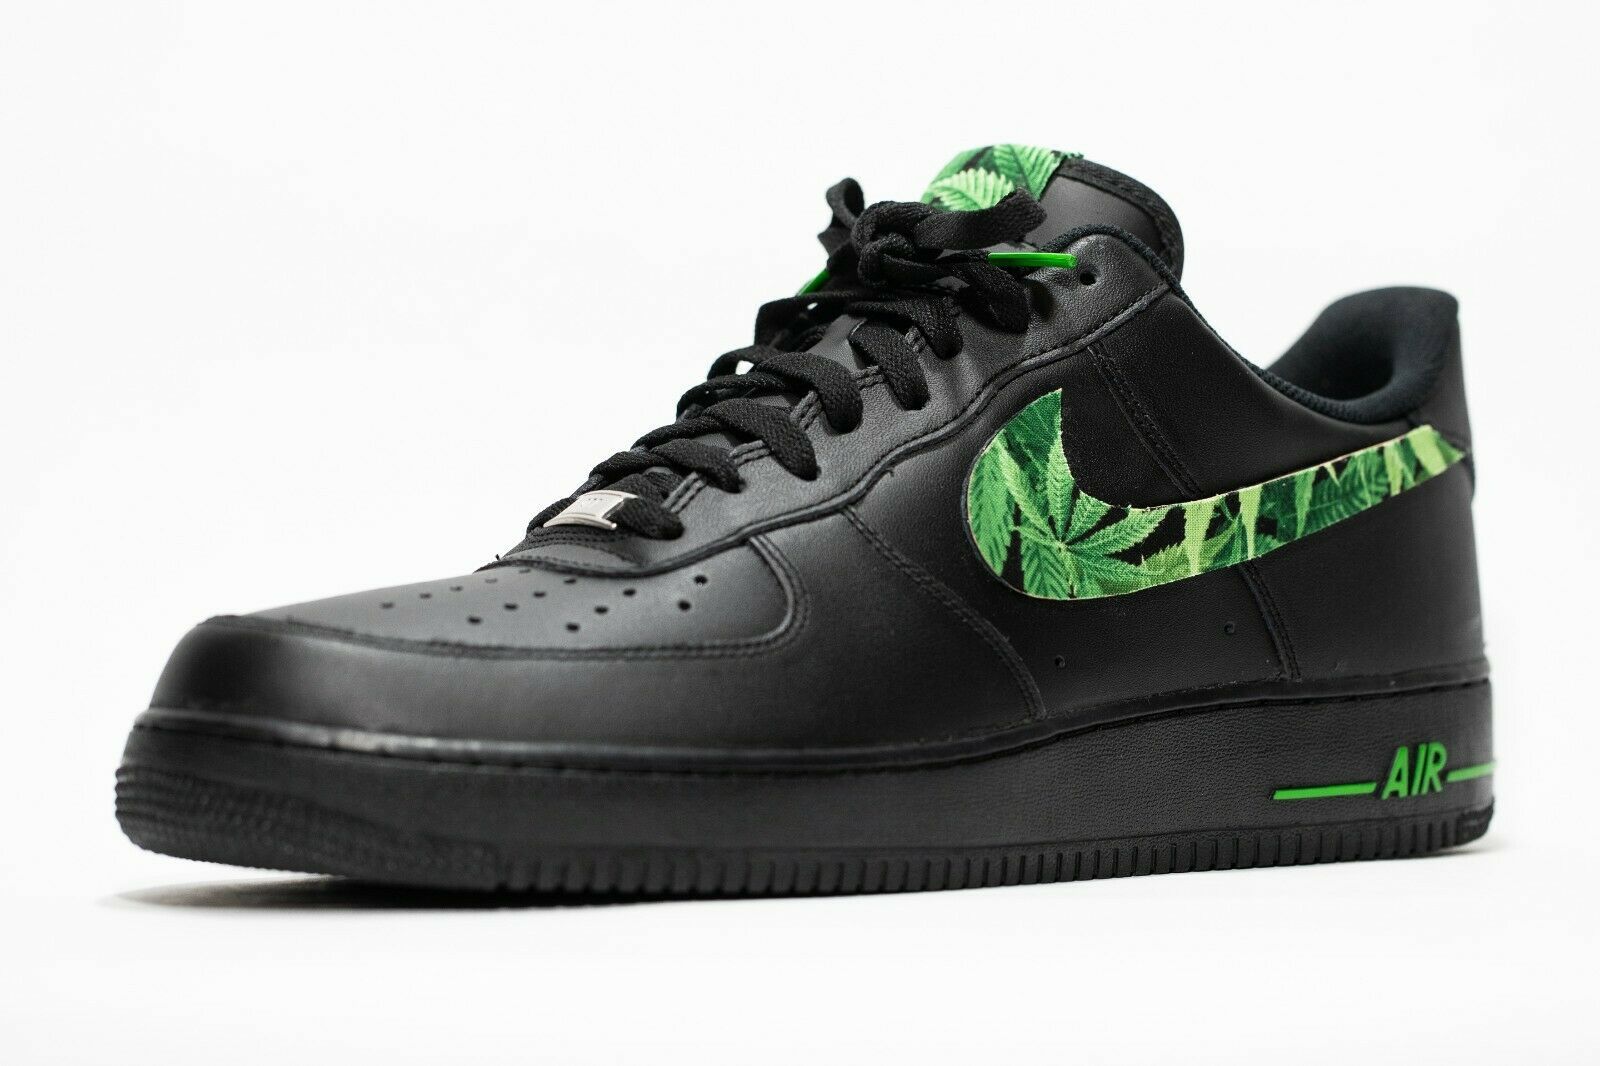 nike air force 1 Black custom 'Kush' available in all sizes 7-13 w/ insoles - Athletic